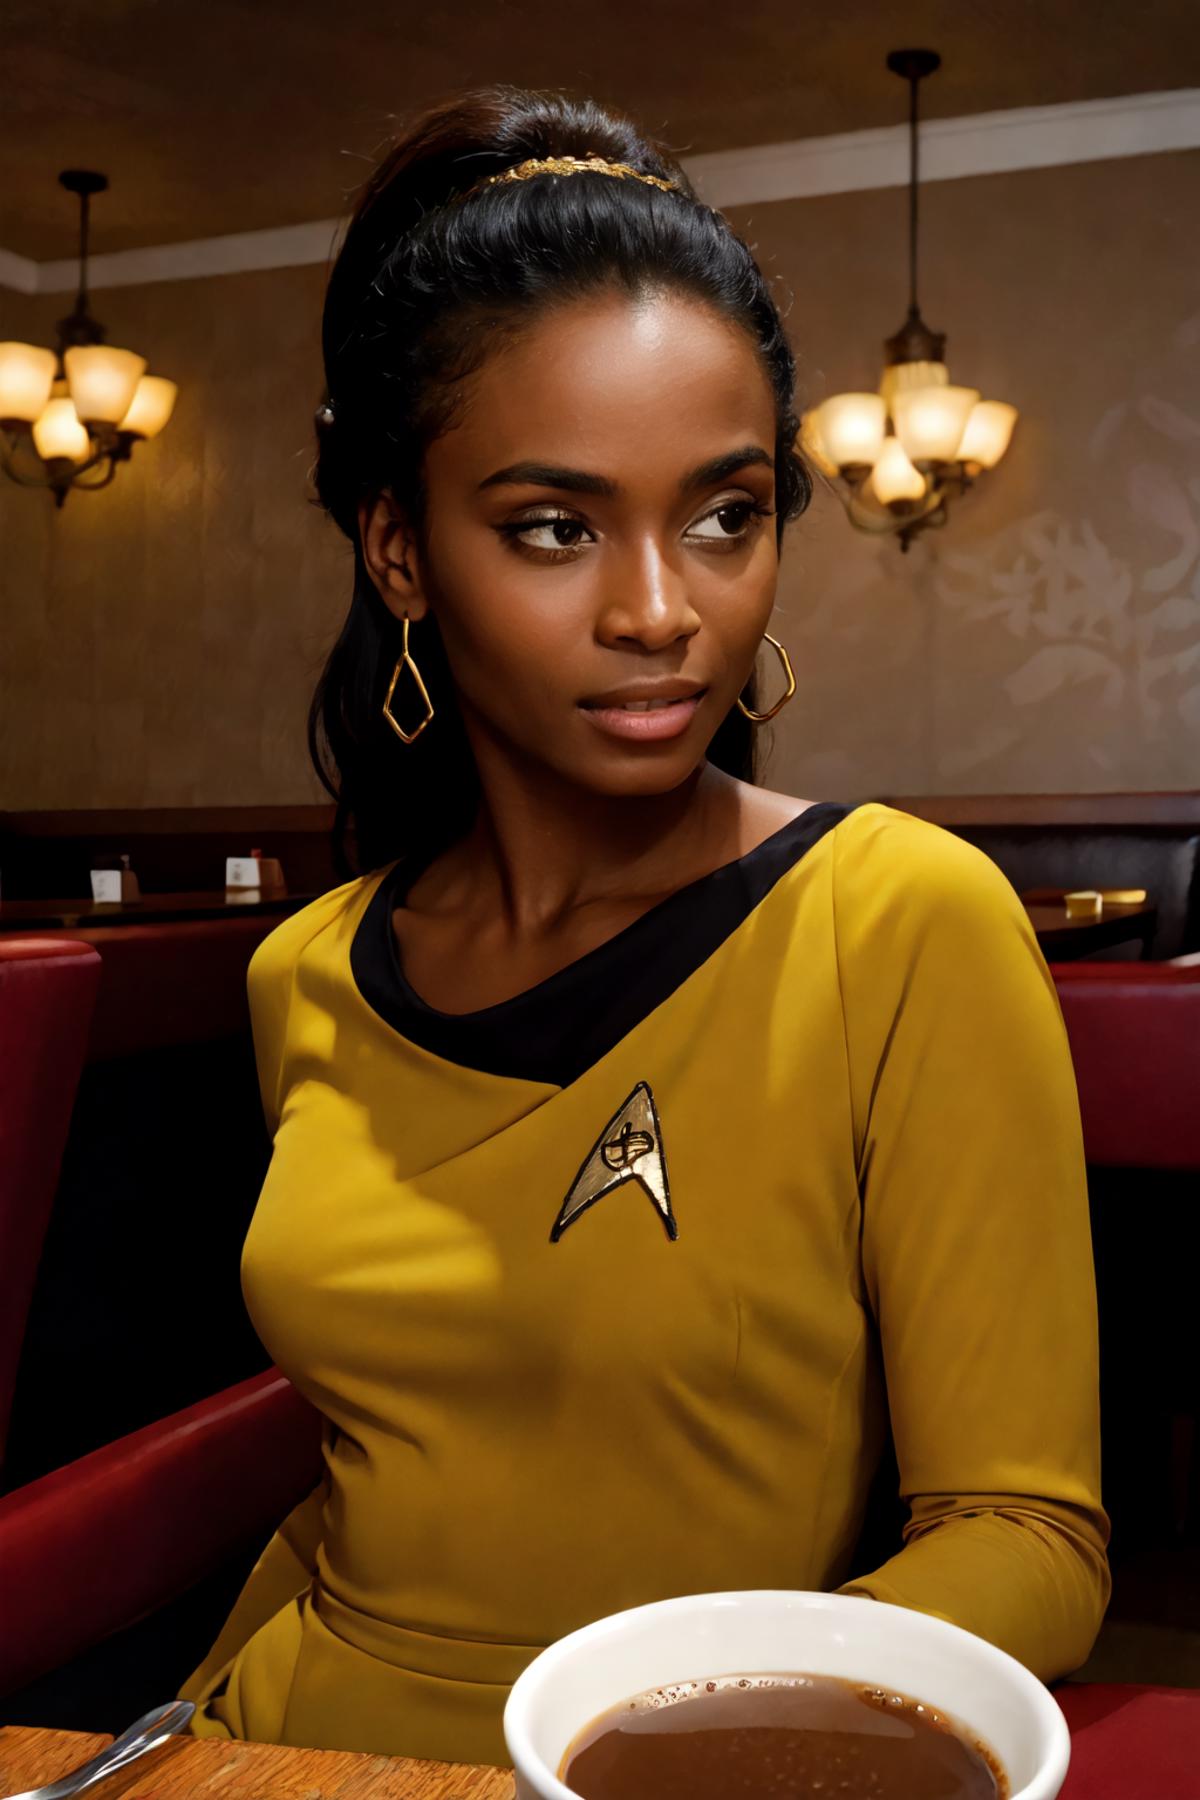 Star Trek TOS uniforms image by impossiblebearcl4060